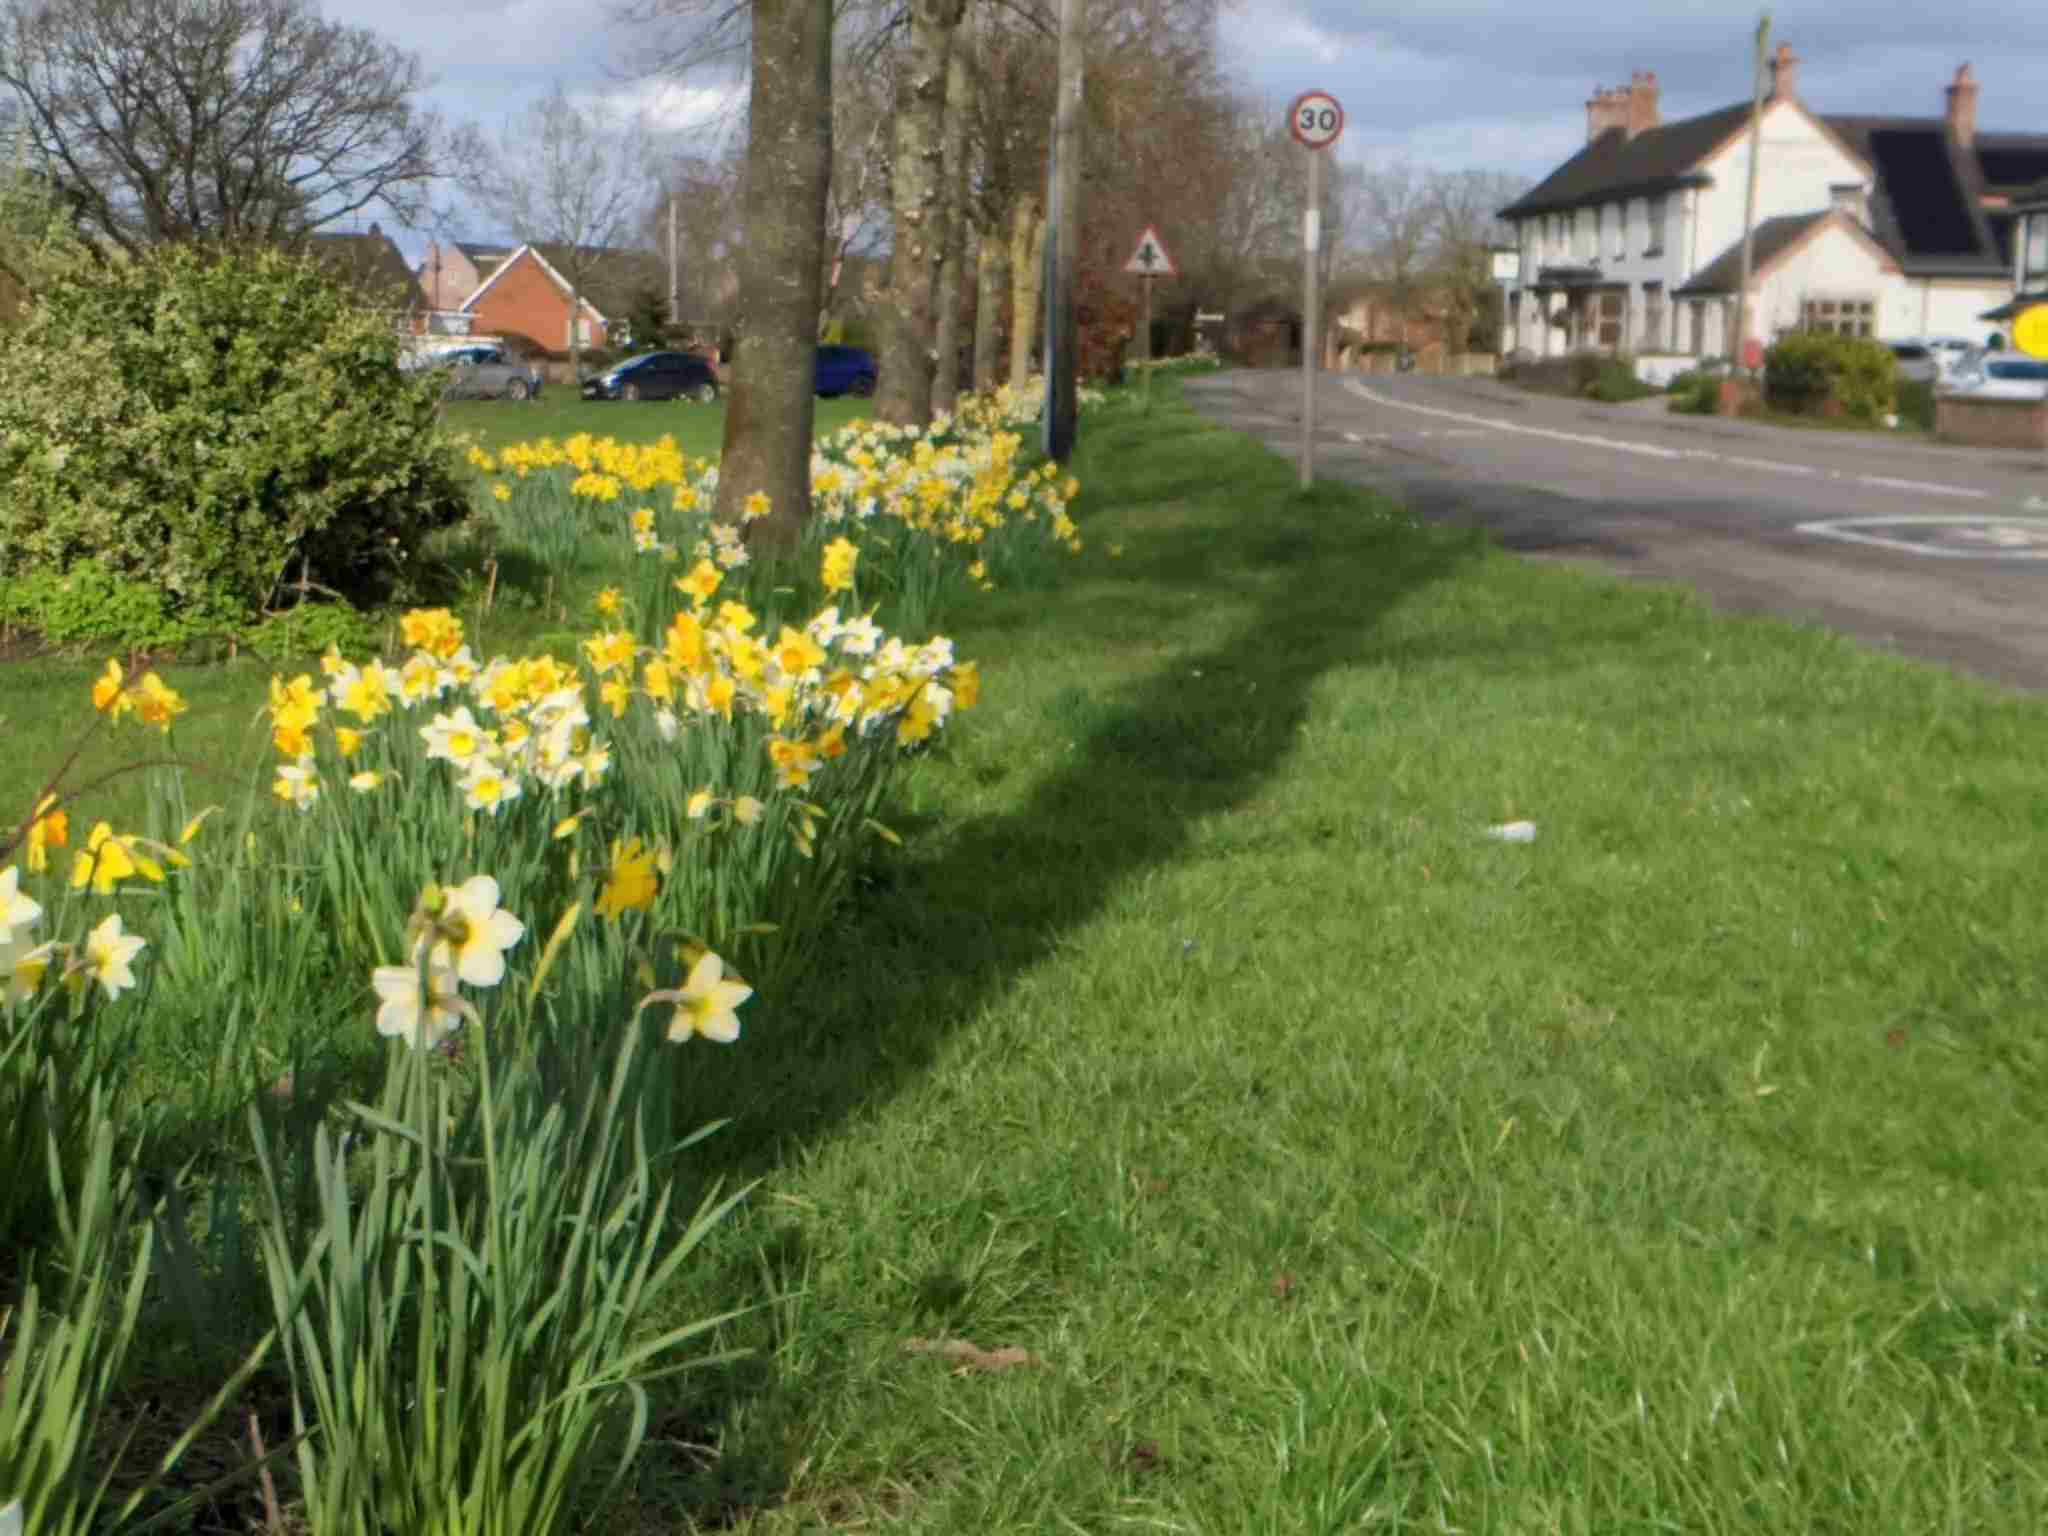 Daffodils on the village green